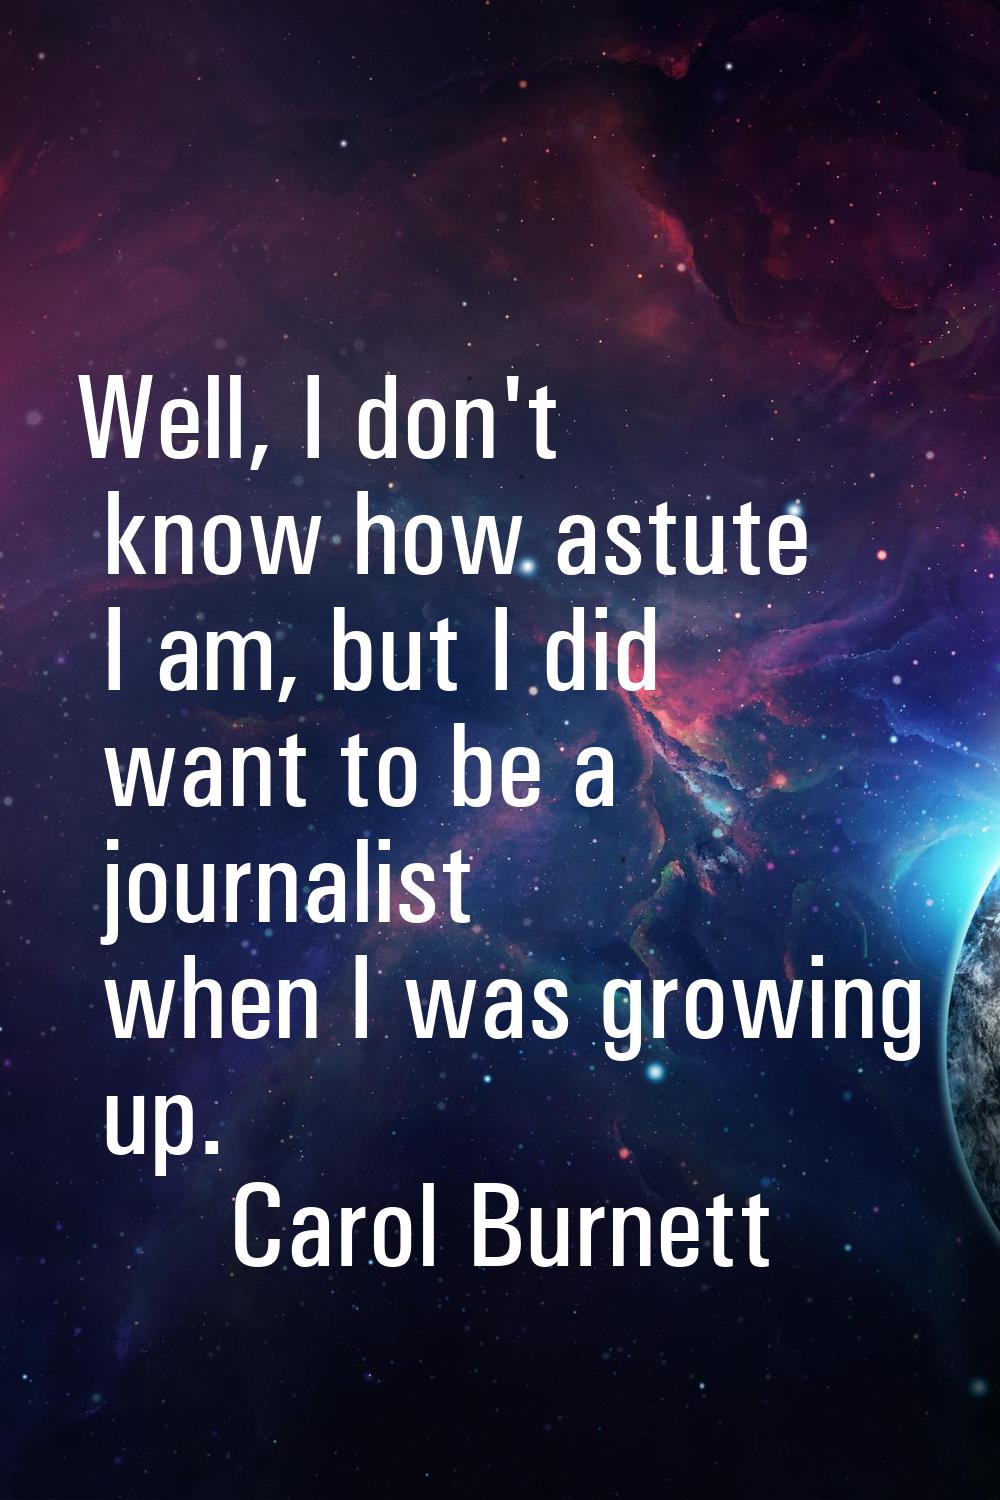 Well, I don't know how astute I am, but I did want to be a journalist when I was growing up.